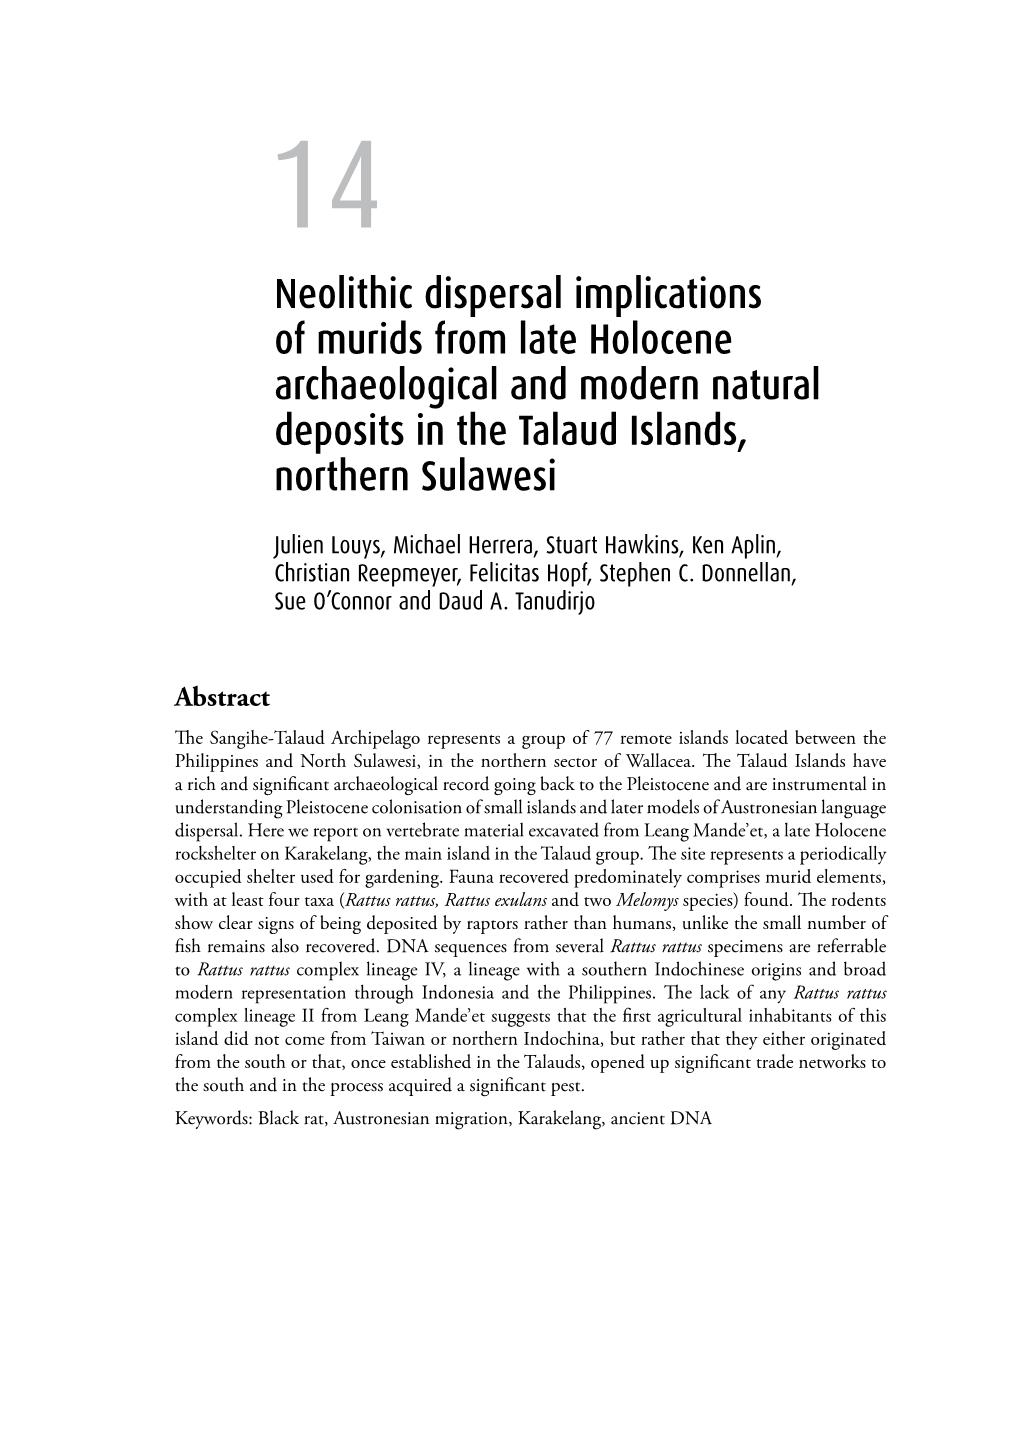 14. Neolithic Dispersal Implications of Murids from Late Holocene Archaeological and Modern Natural Deposits 225